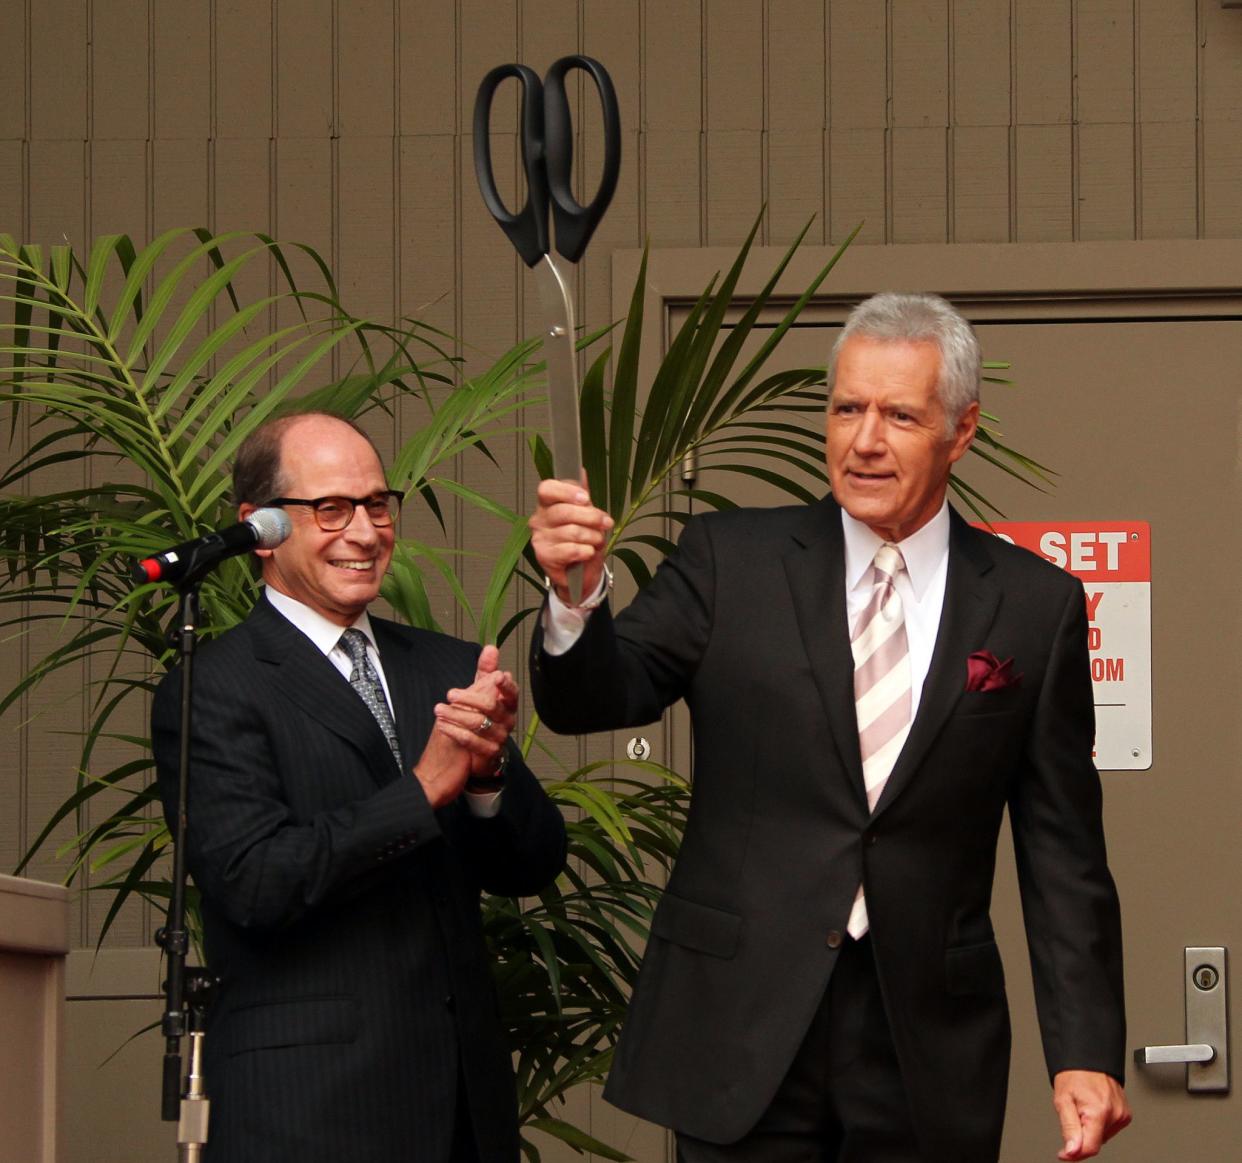 Harry Friedman, executive producer of Sony Pictures Television (l.) and host Alex Trebek pose during ribbon cutting at Sony Pictures for the 28th season premiere of "Jeopardy!" on Sept. 20, 2011 in Culver City, Calif.